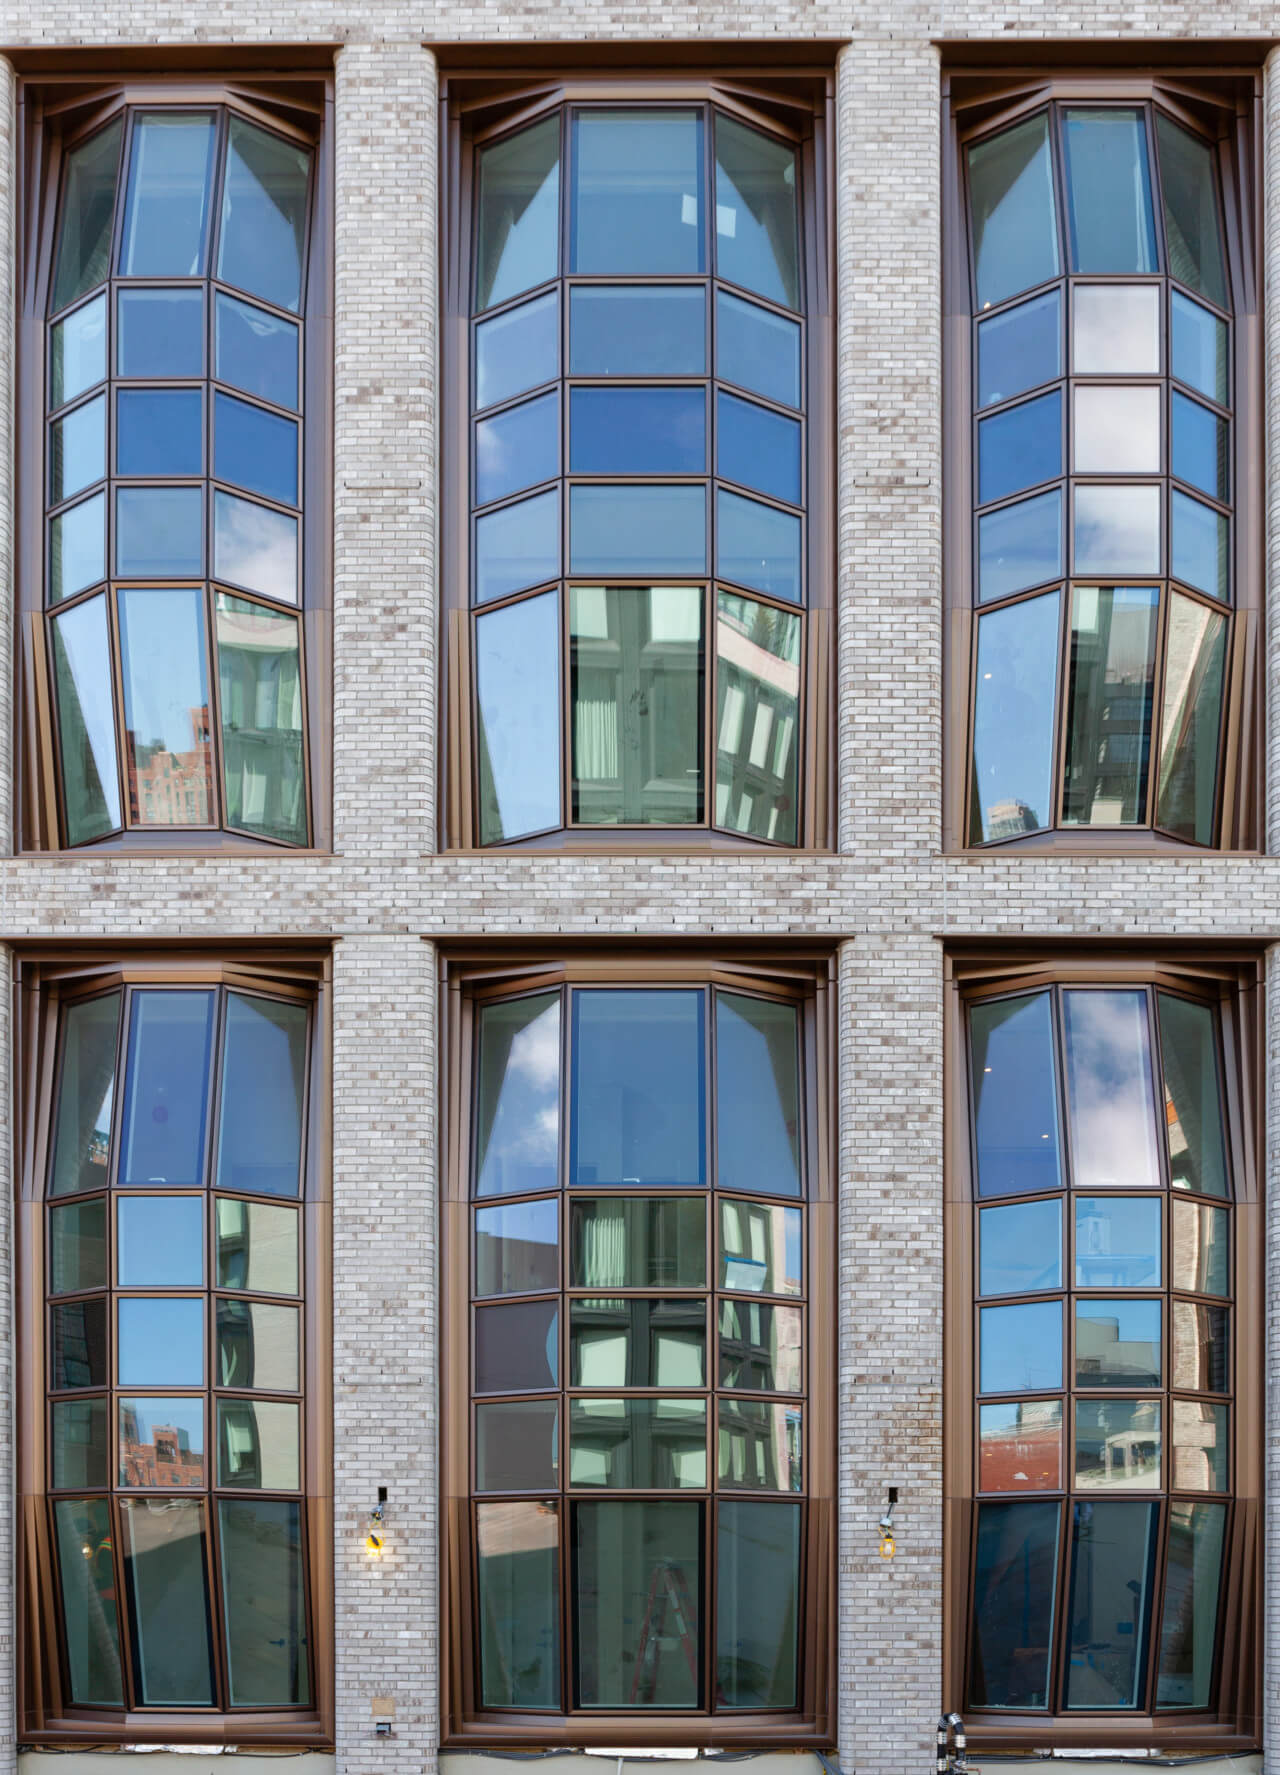 exterior photograph of a contemporary New York luxury residential building with large bay windows